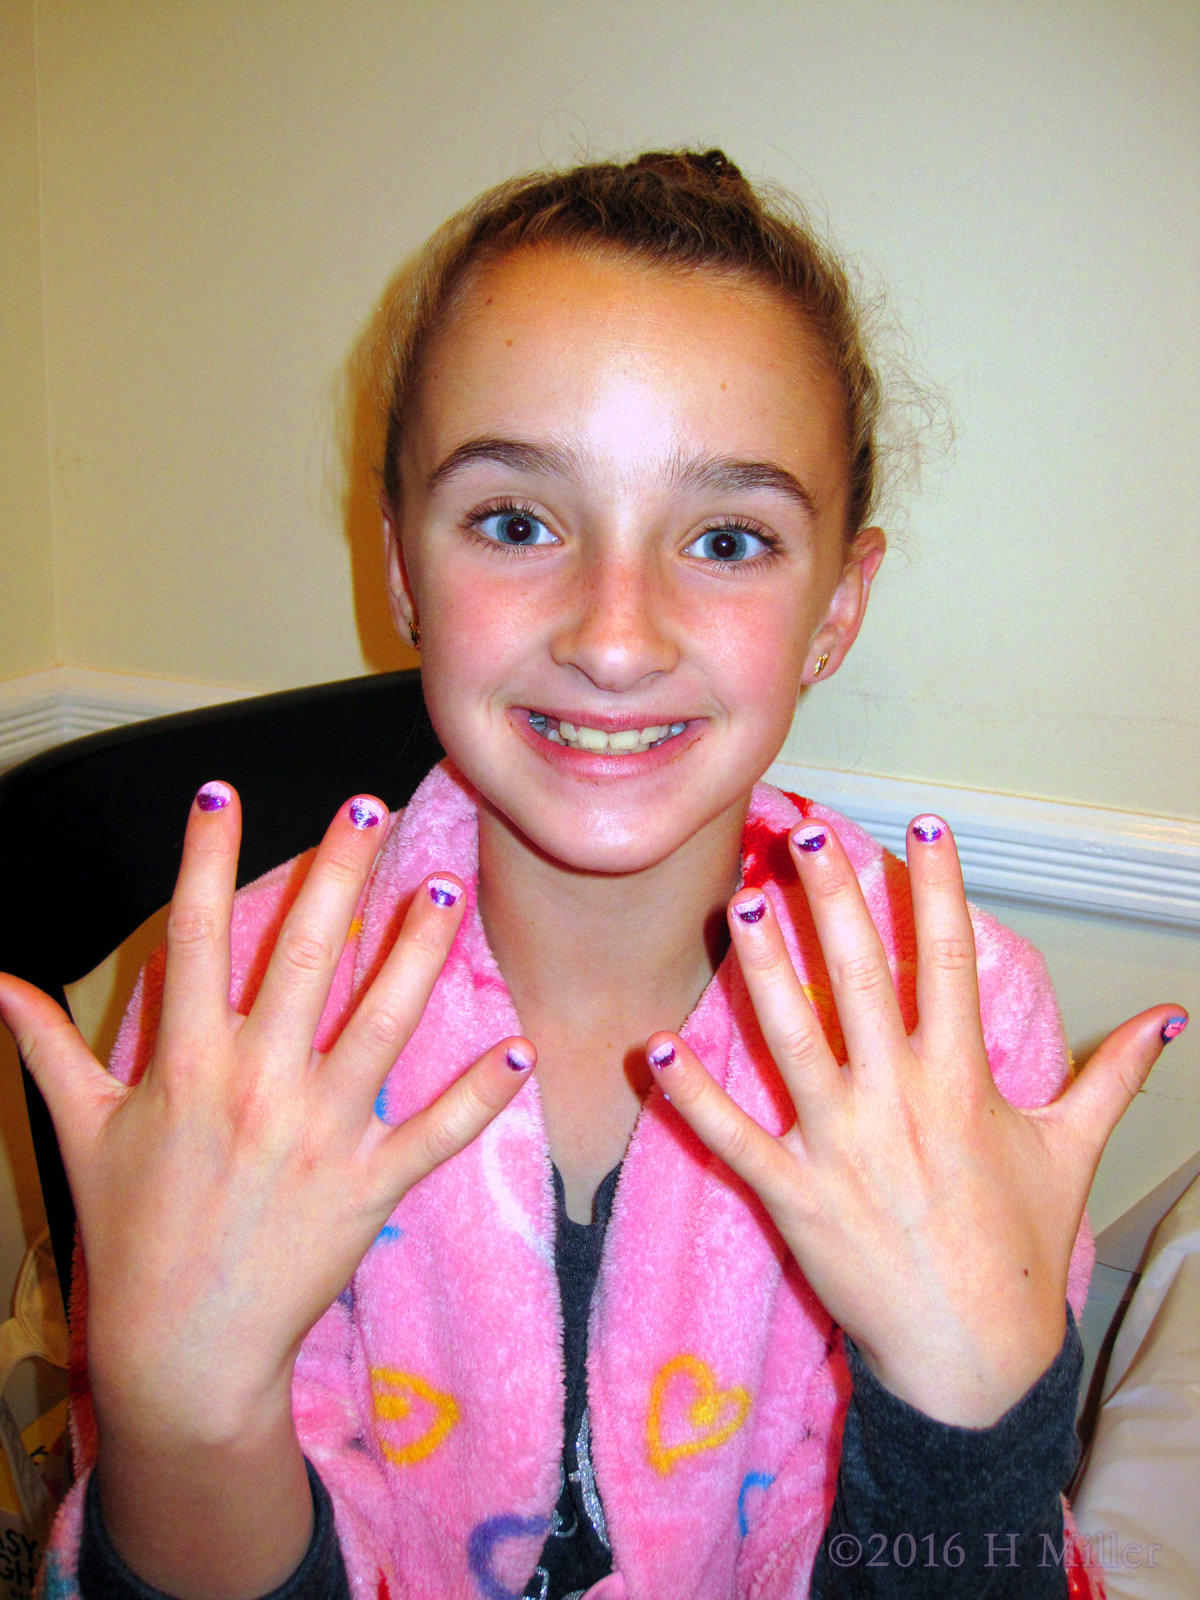 Manicure For Girls Brings Big Smiles!